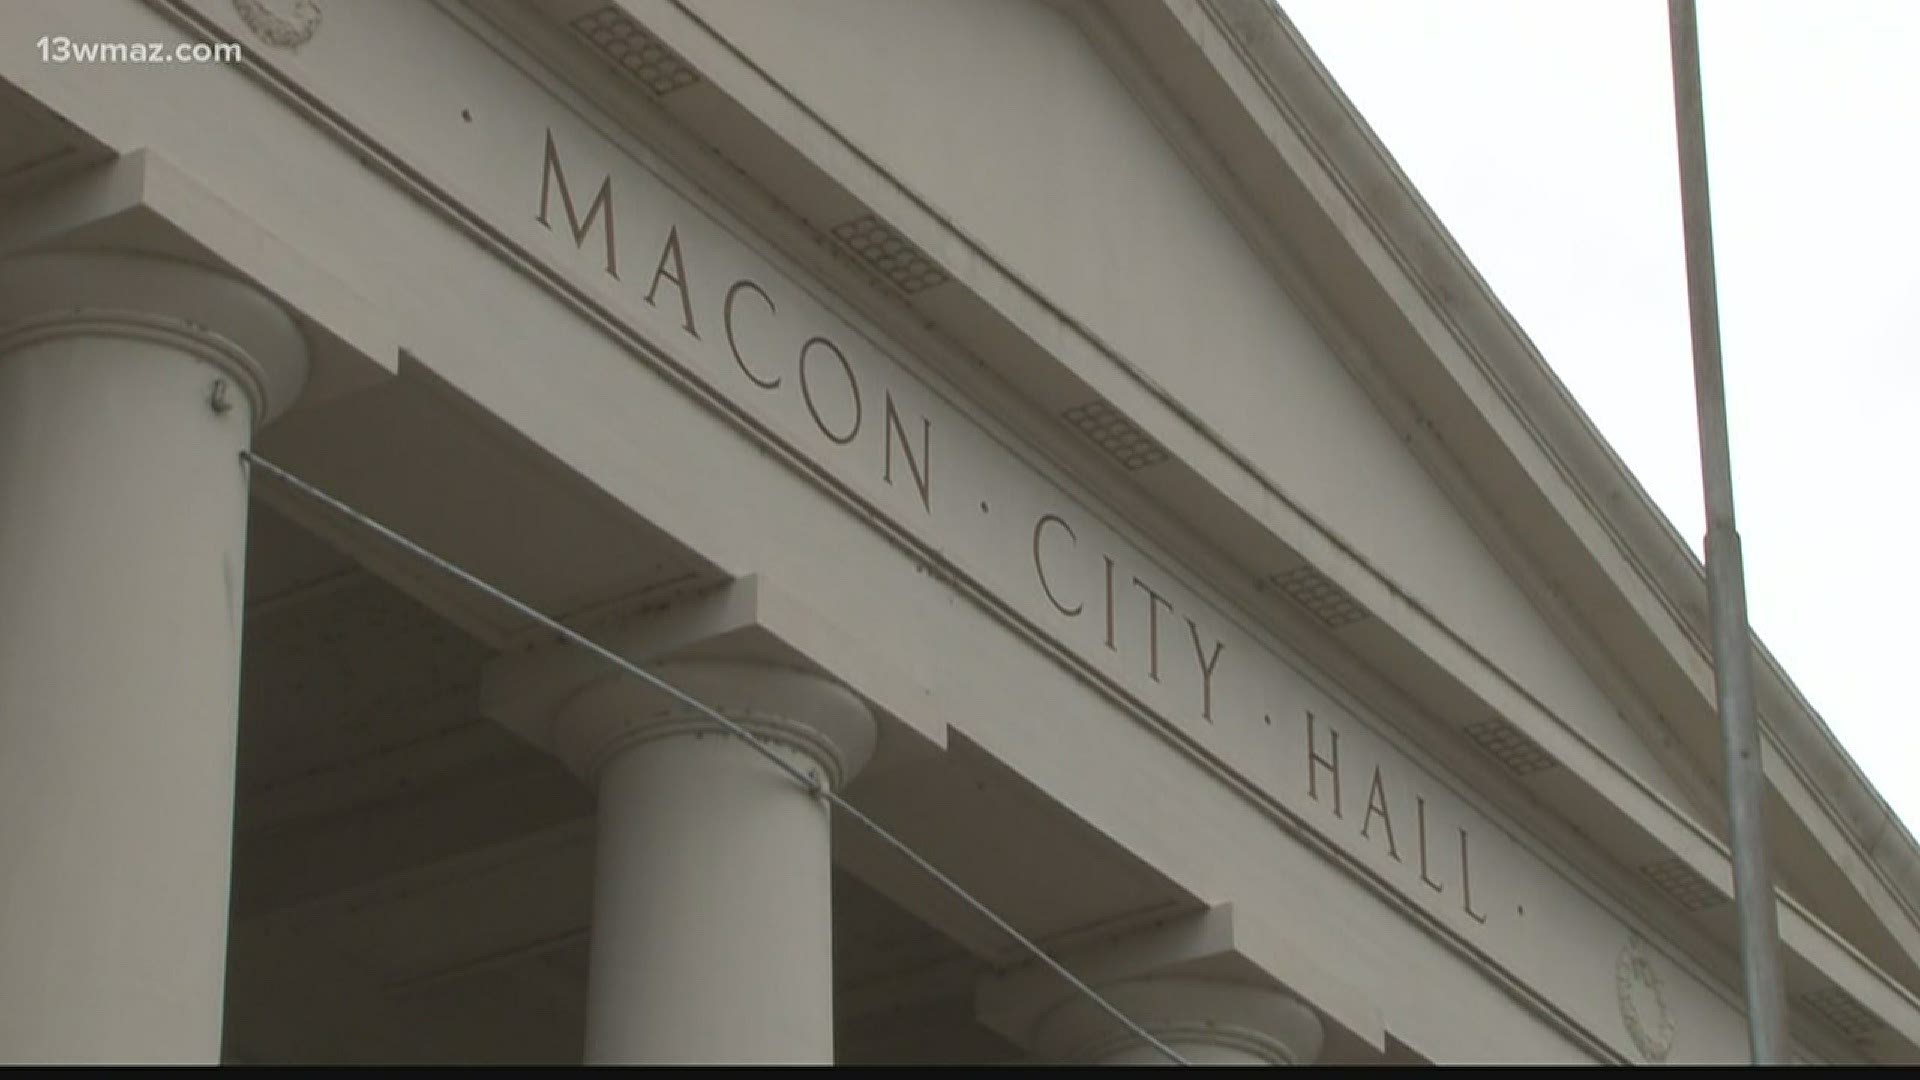 4 candidates are running for the Macon-Bibb commission District 5 seat. Here's why they believe they deserve your vote and what issues they will focus on if elected.